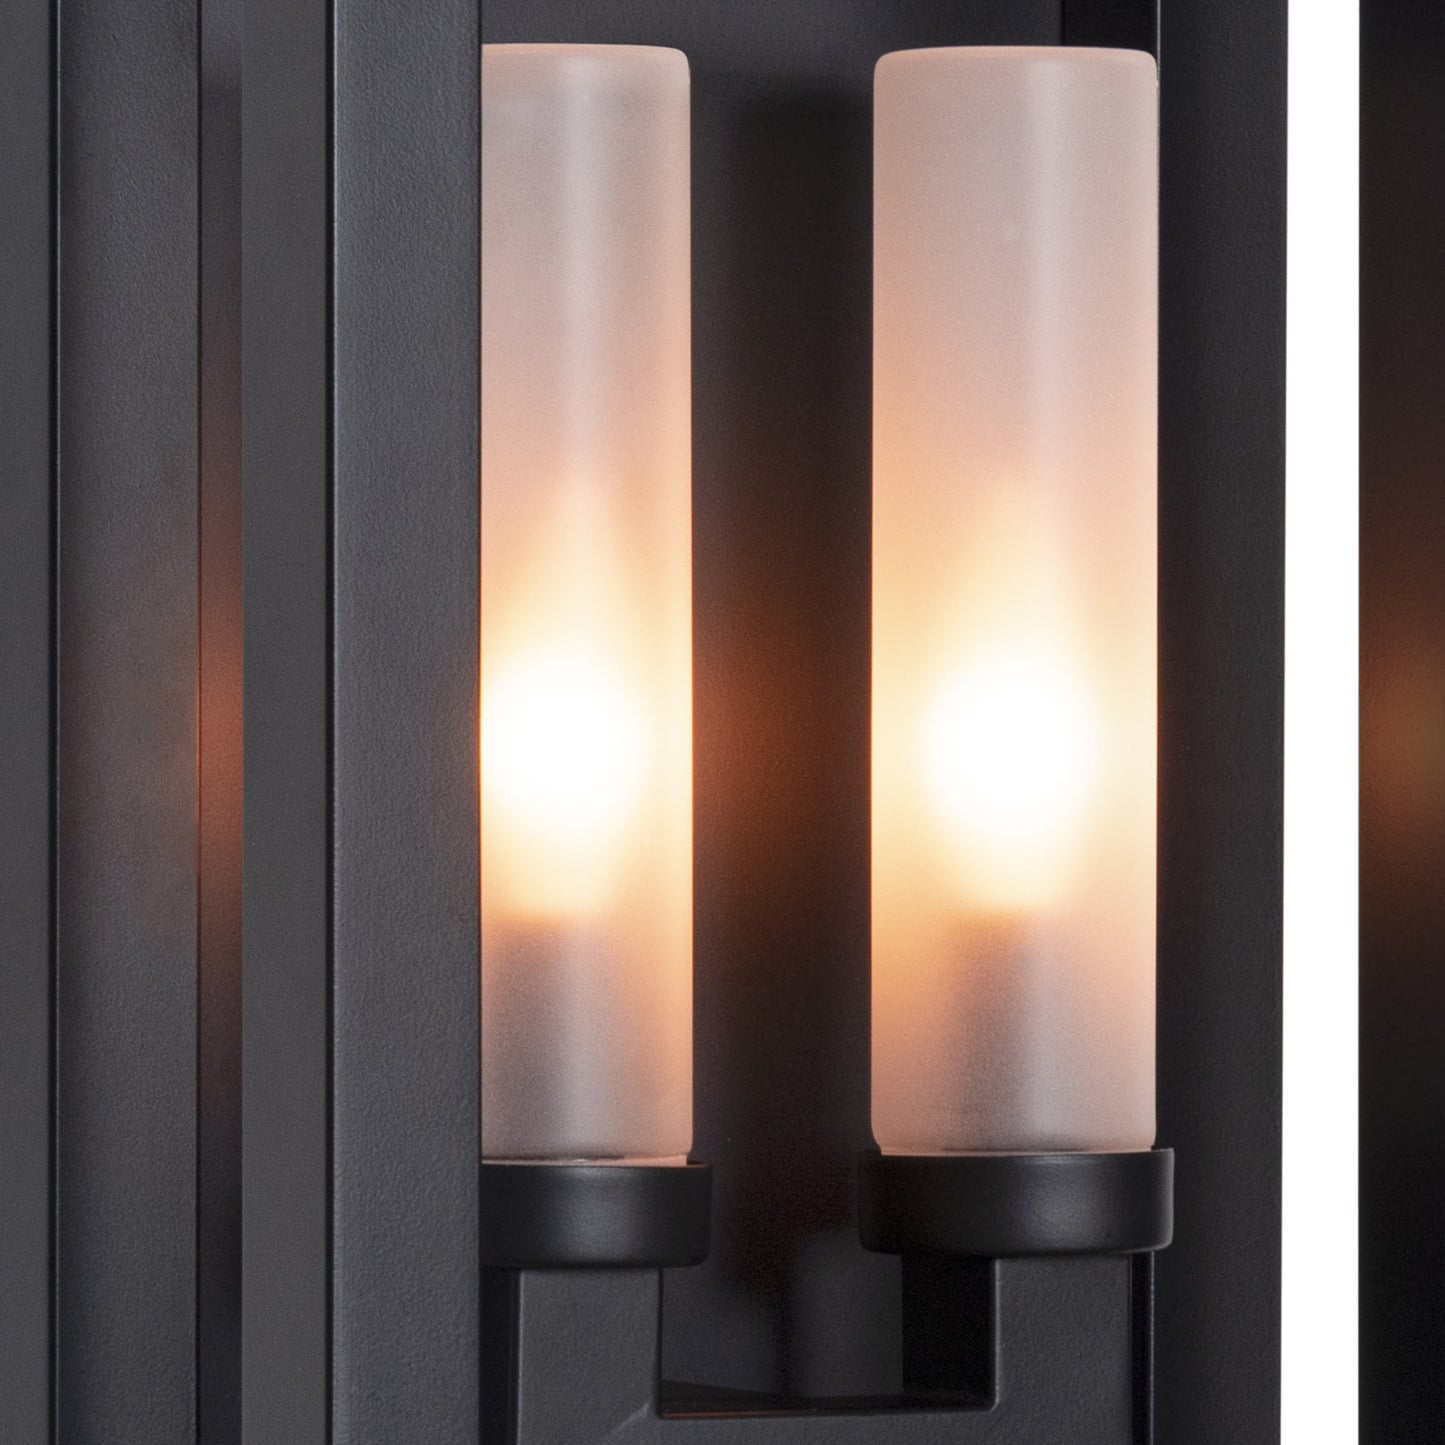 Montecito Double Arm Outdoor Sconce by Coastal Living